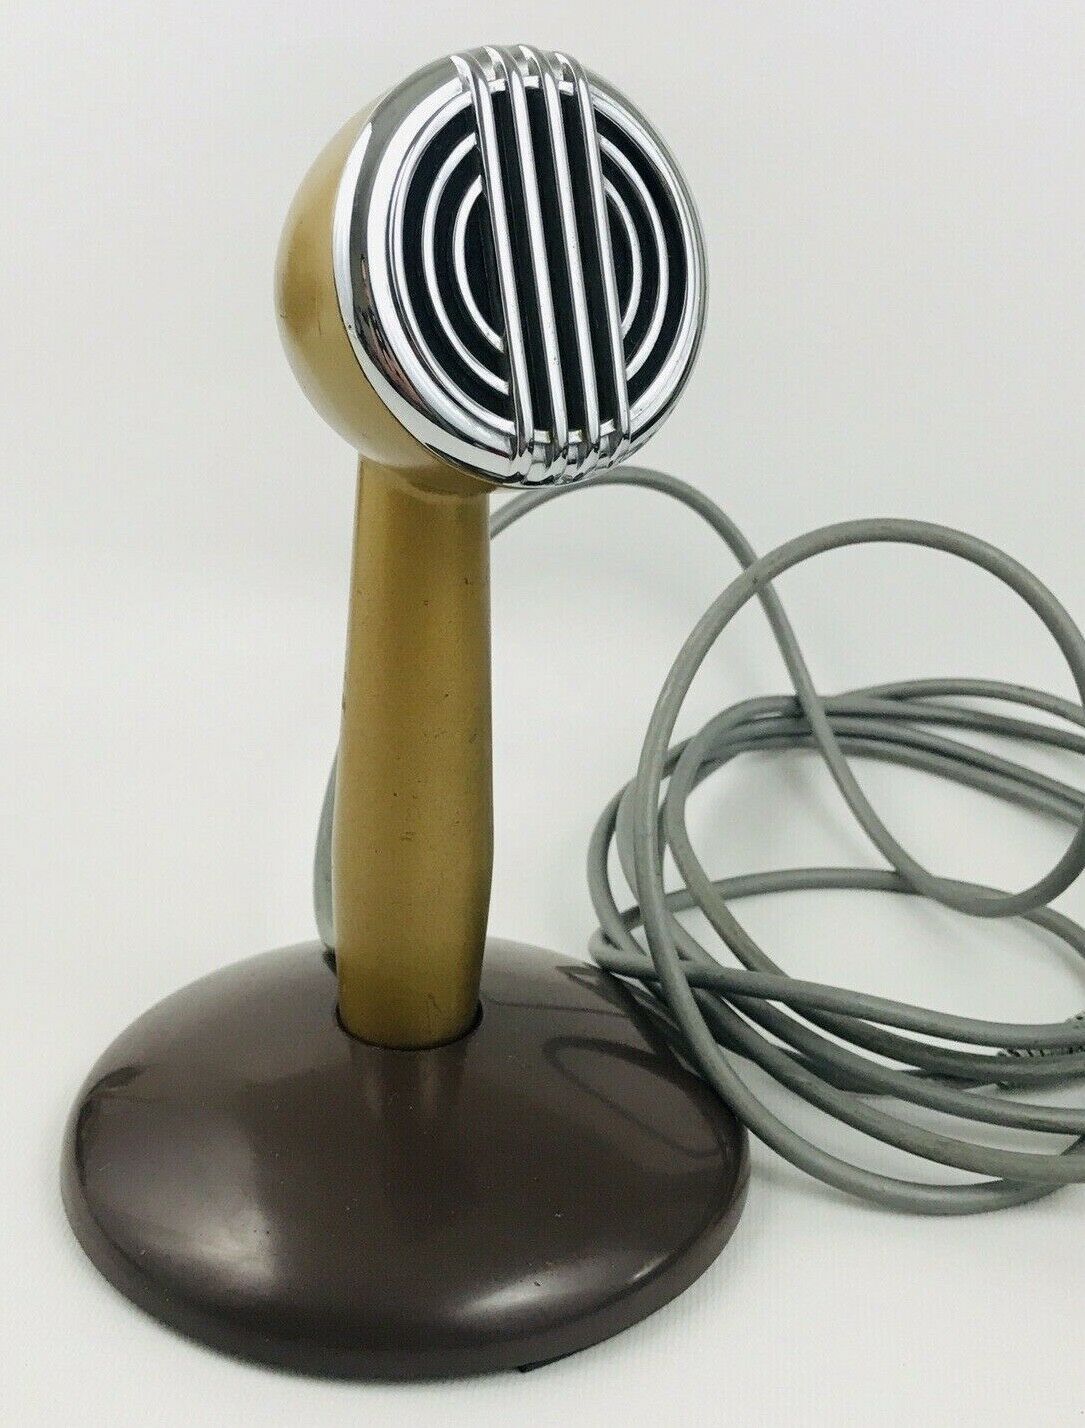 Vintage Astatic Stand Up Bullet Microphone Gold On Base With Cord